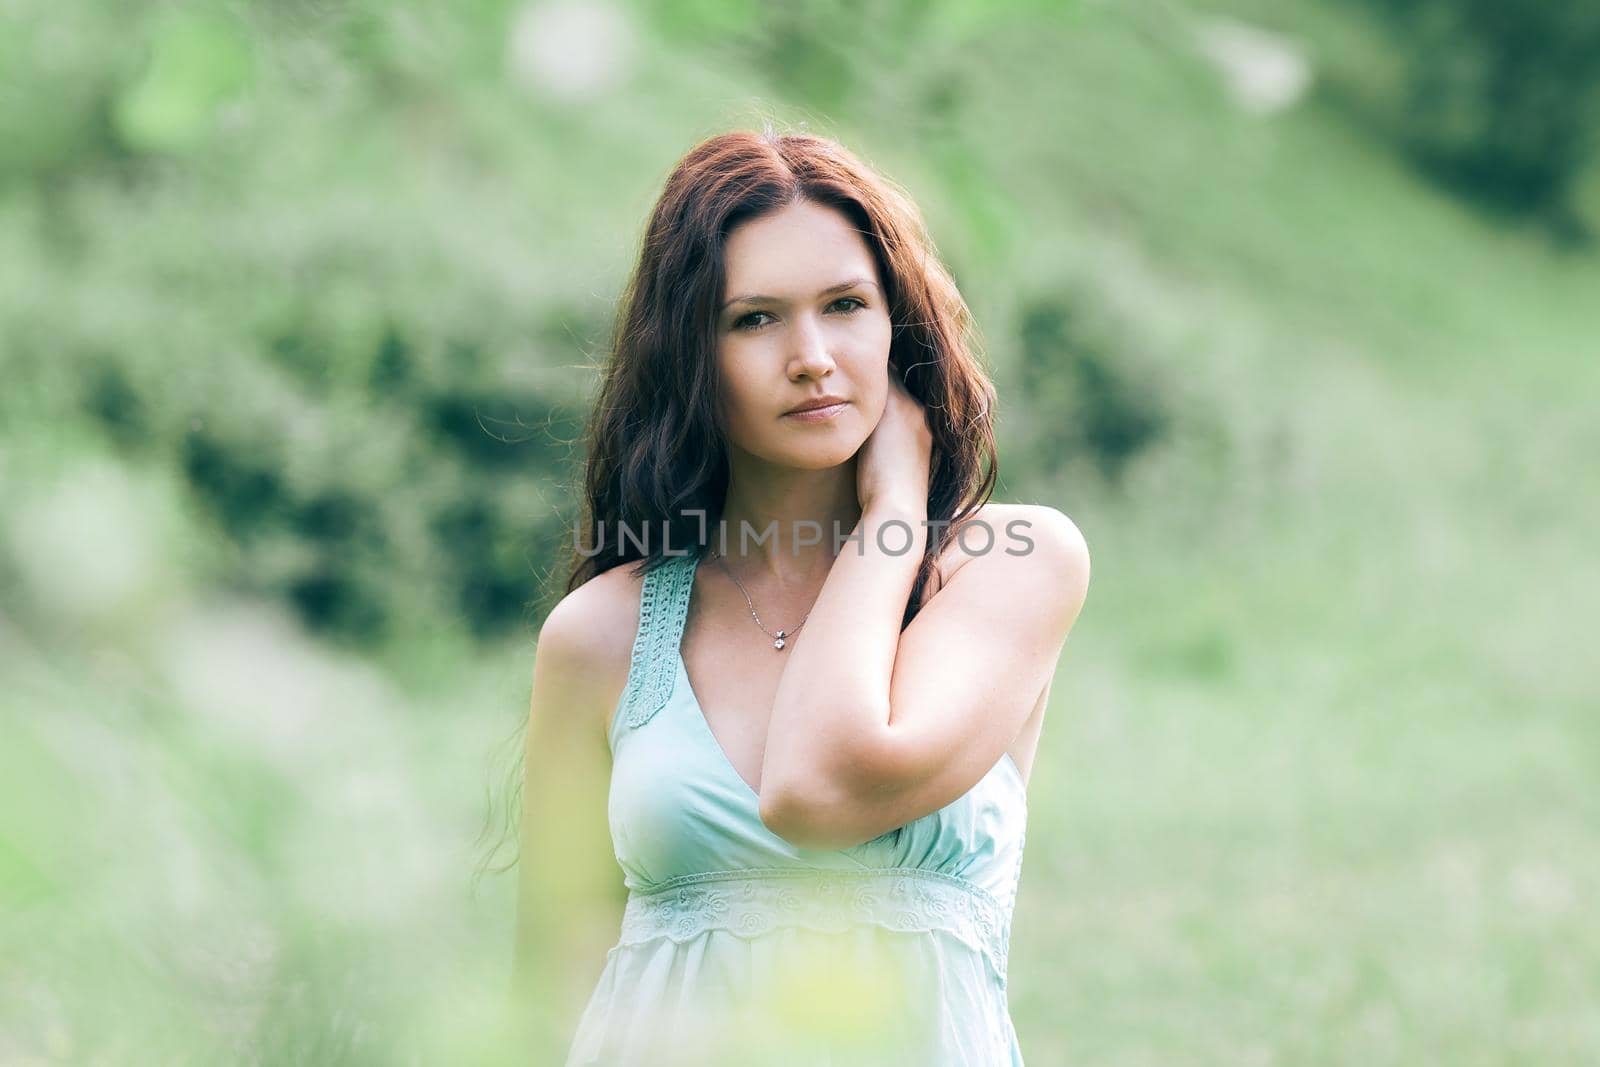 pensive young woman standing in summer Park. photo with copy space